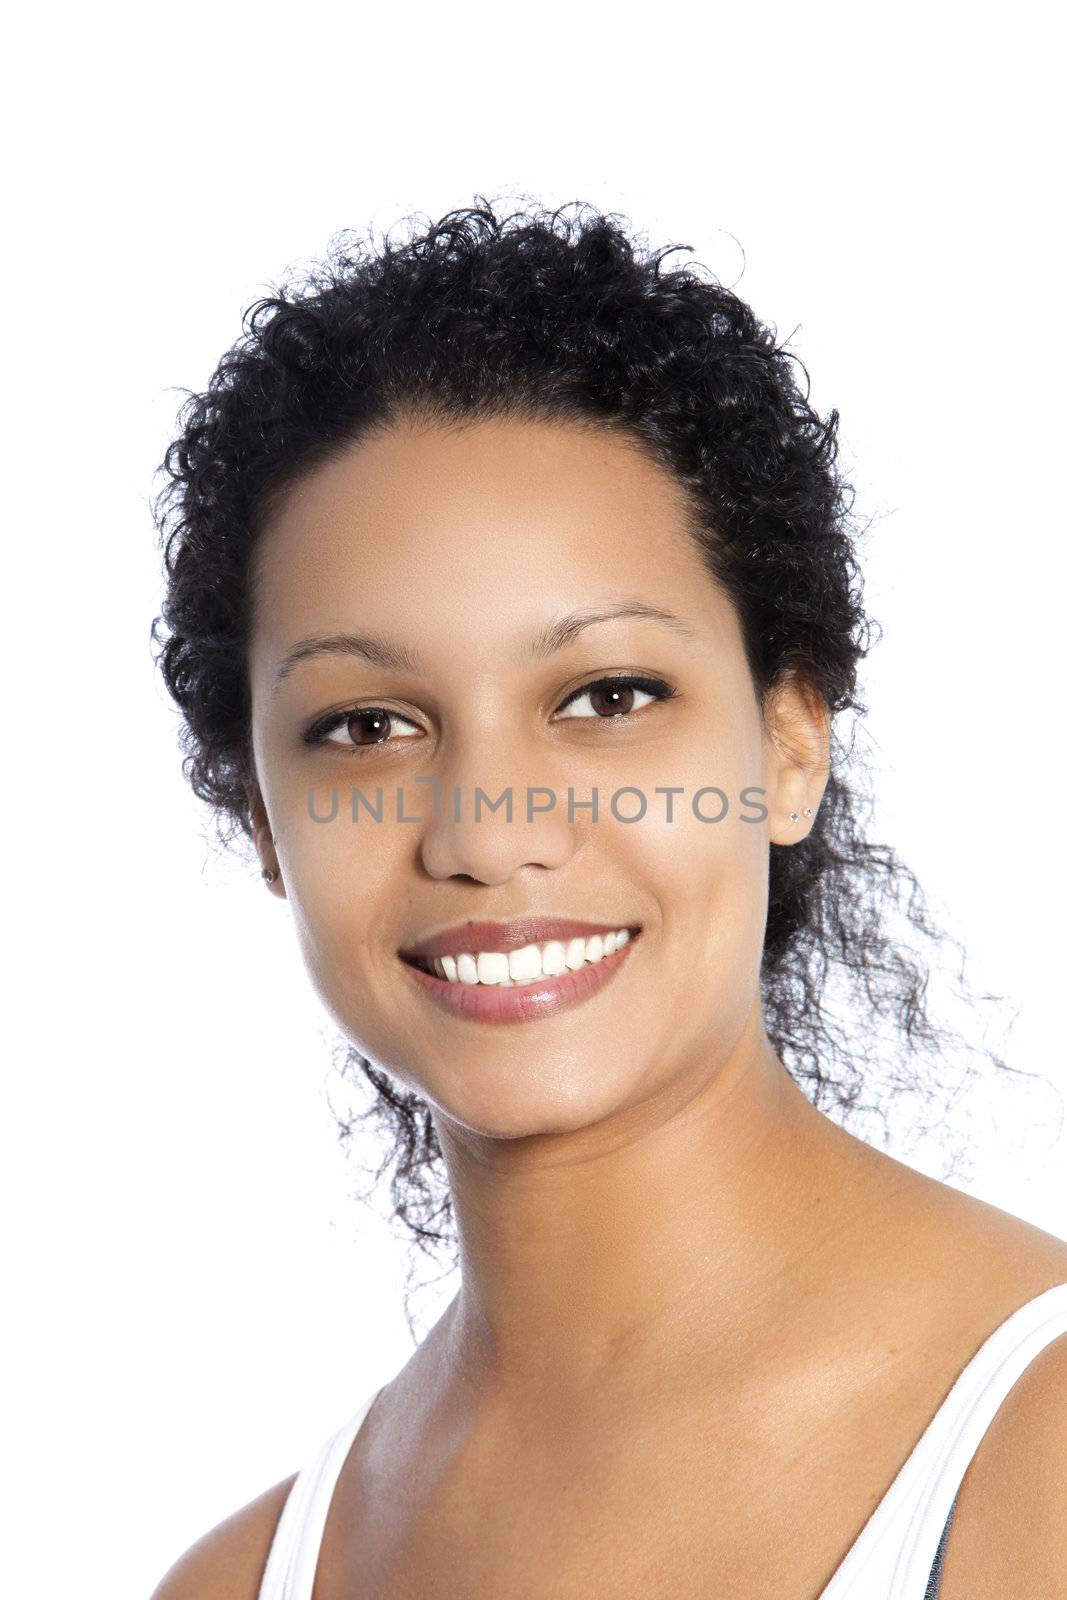 Portrait of beautiful smiling woman by Farina6000